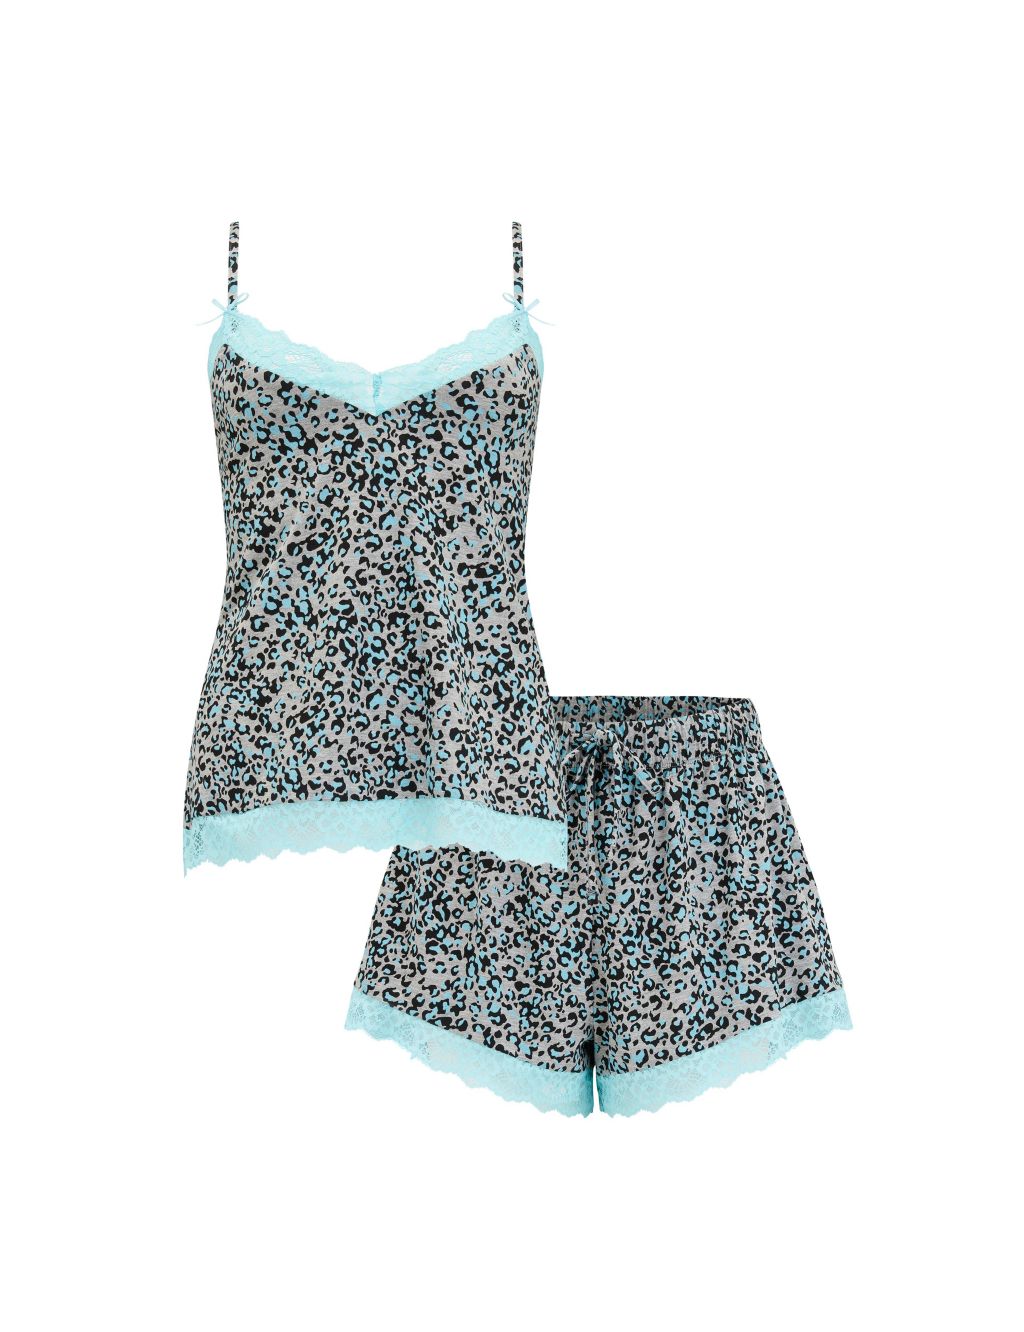 Sofa Loves Lace Jersey Camisole Set 1 of 5